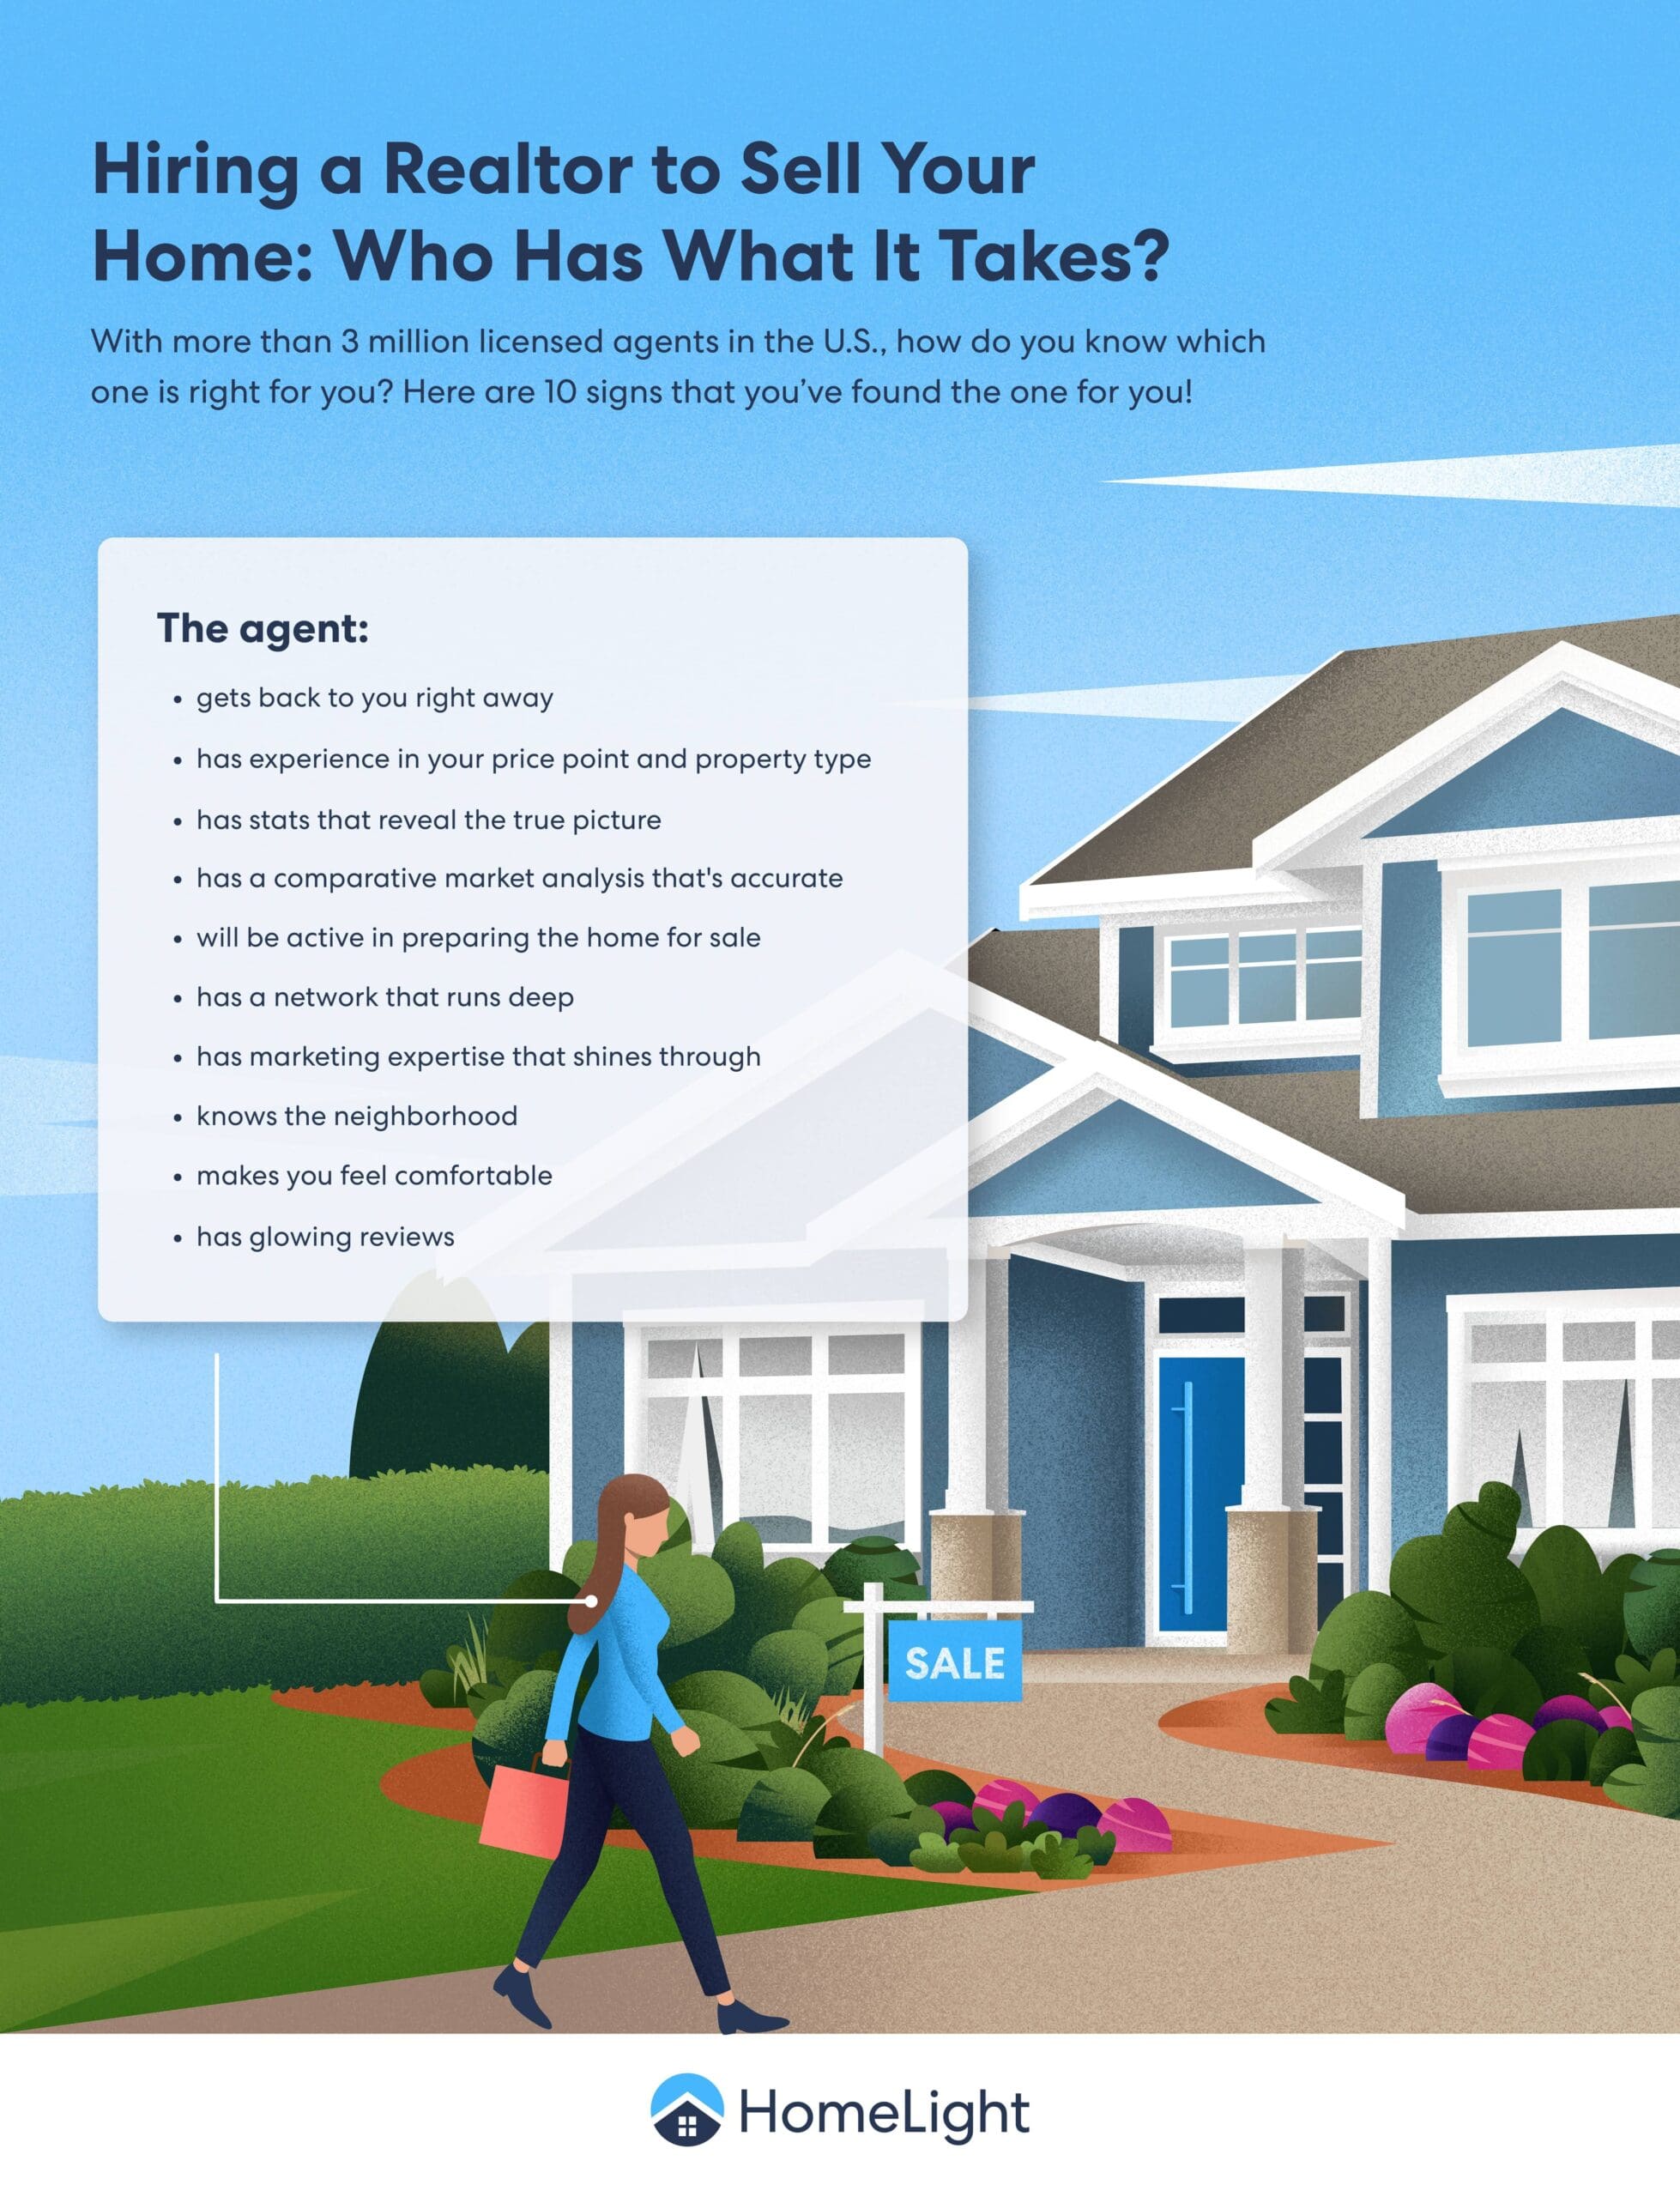 Hiring a Realtor to Sell Your Home: Who Has What it Takes?